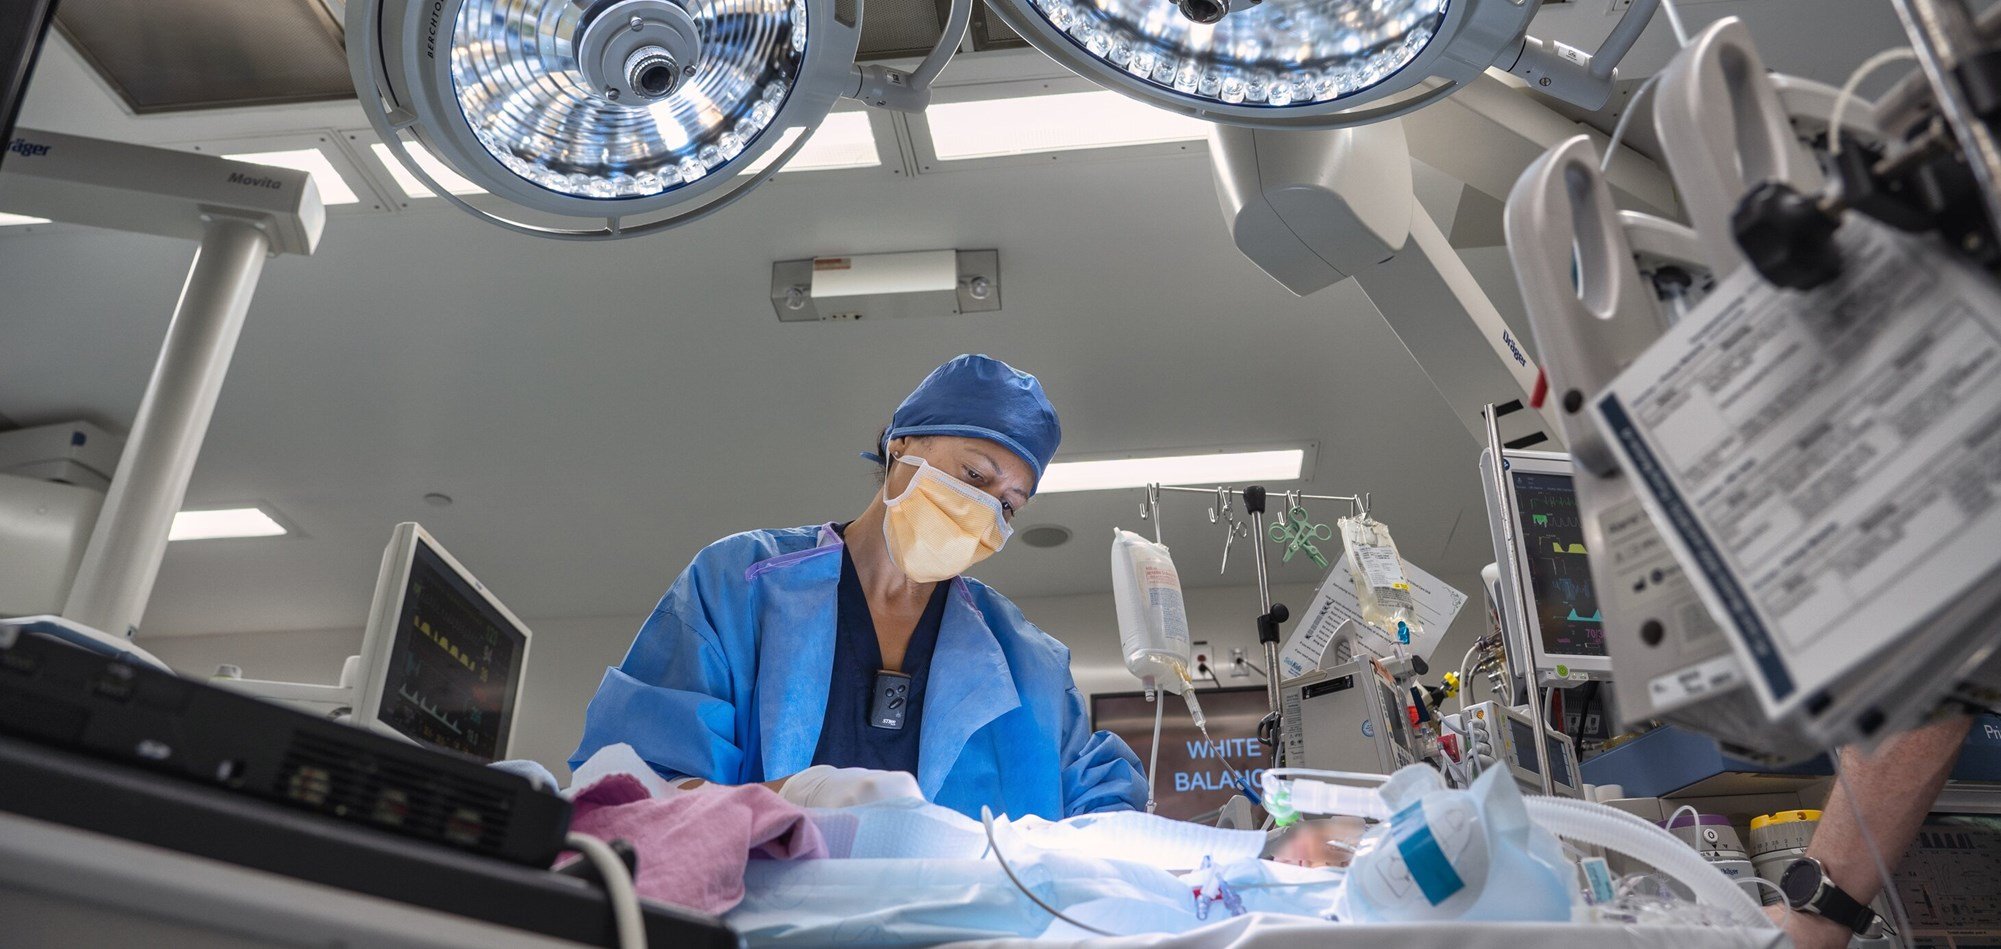 View of an operating room and doctor in action with surgical lights above